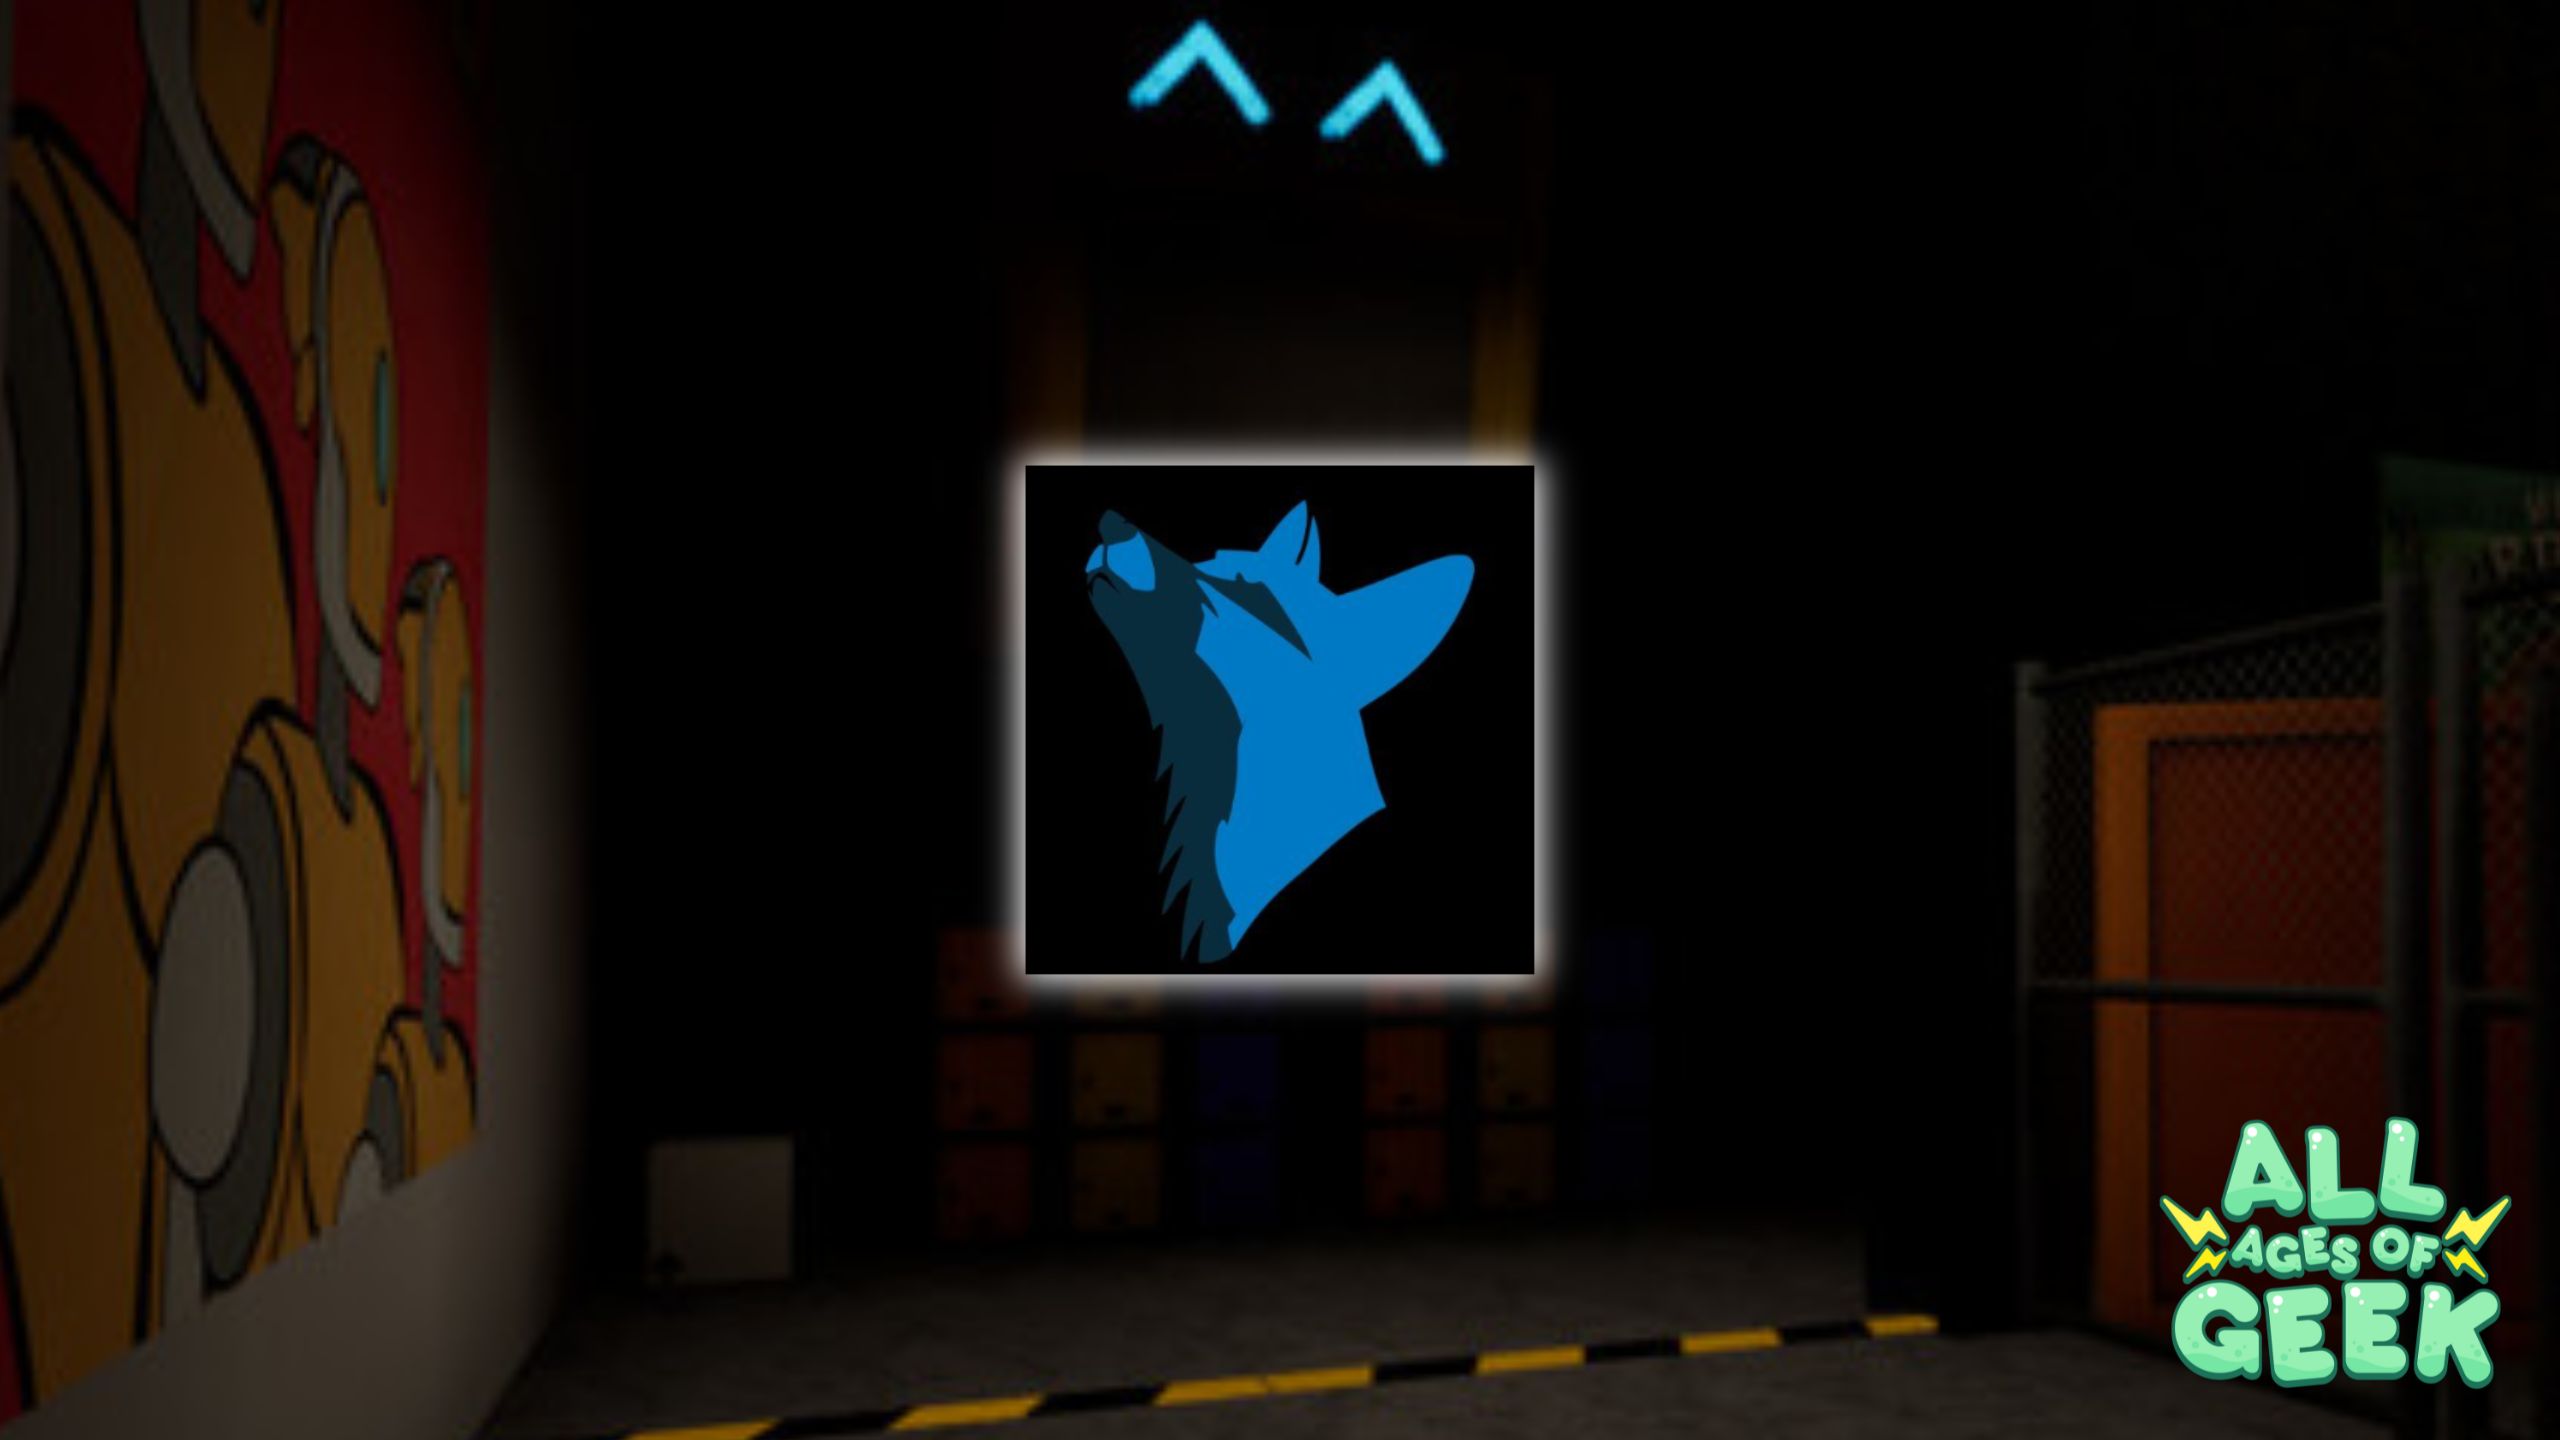 A dimly lit room with a glowing sign displaying a blue wolf head, the logo of Belfrost Studios, prominently in the center. The background features colorful robotic artwork on the left wall and a chain-link fence on the right. The "All Ages of Geek" logo is displayed in the bottom right corner.